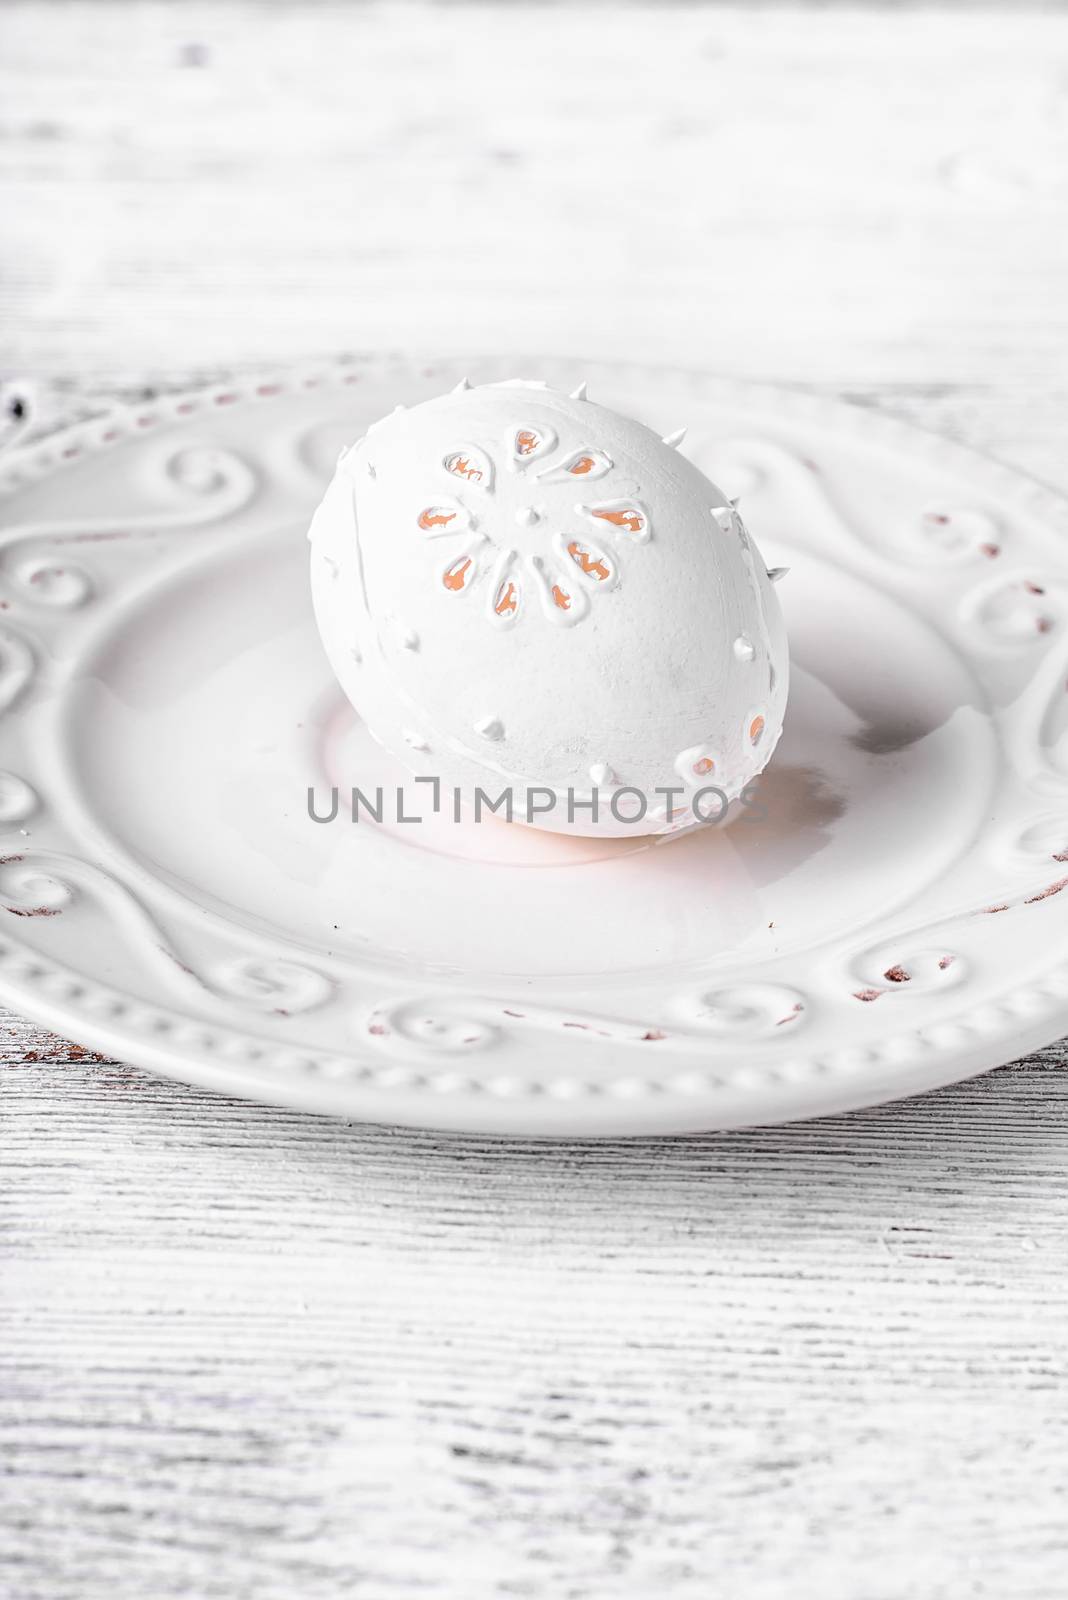 Decorative carved chicken egg for Easter to light the plate.Photograph high key.